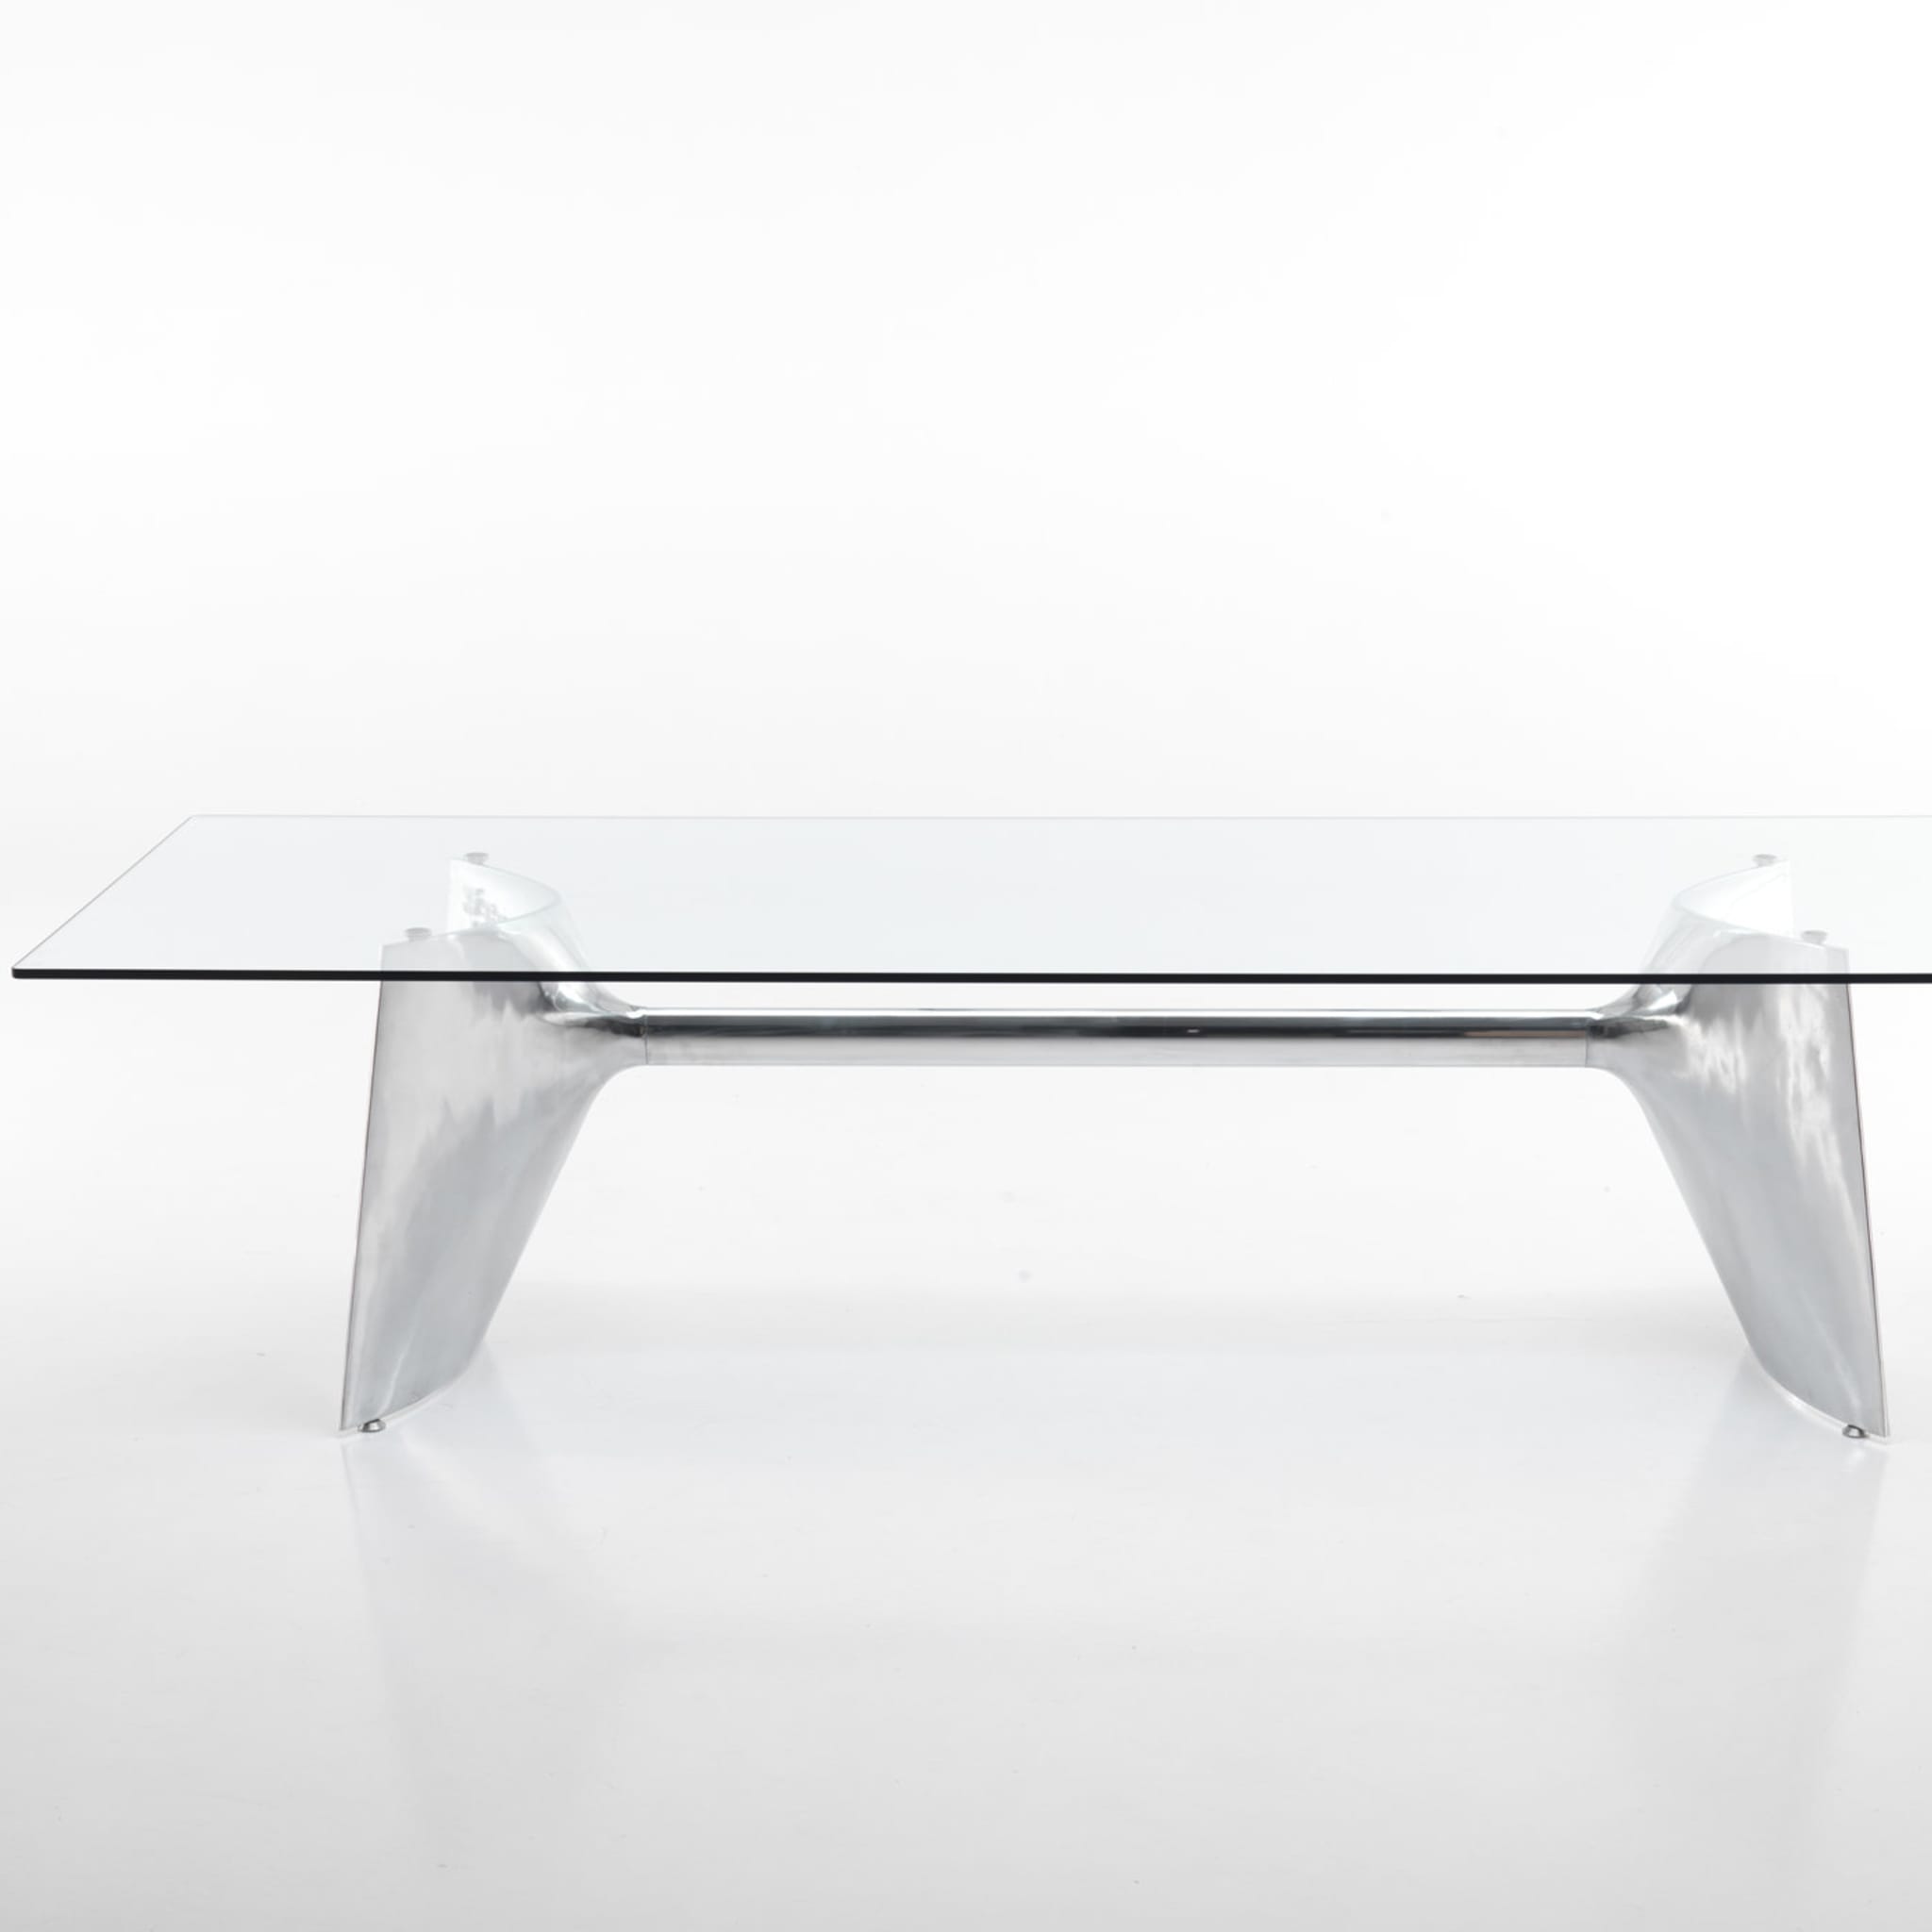 Fratino Rectangular Dining Table by Jeff Miller - Alternative view 1